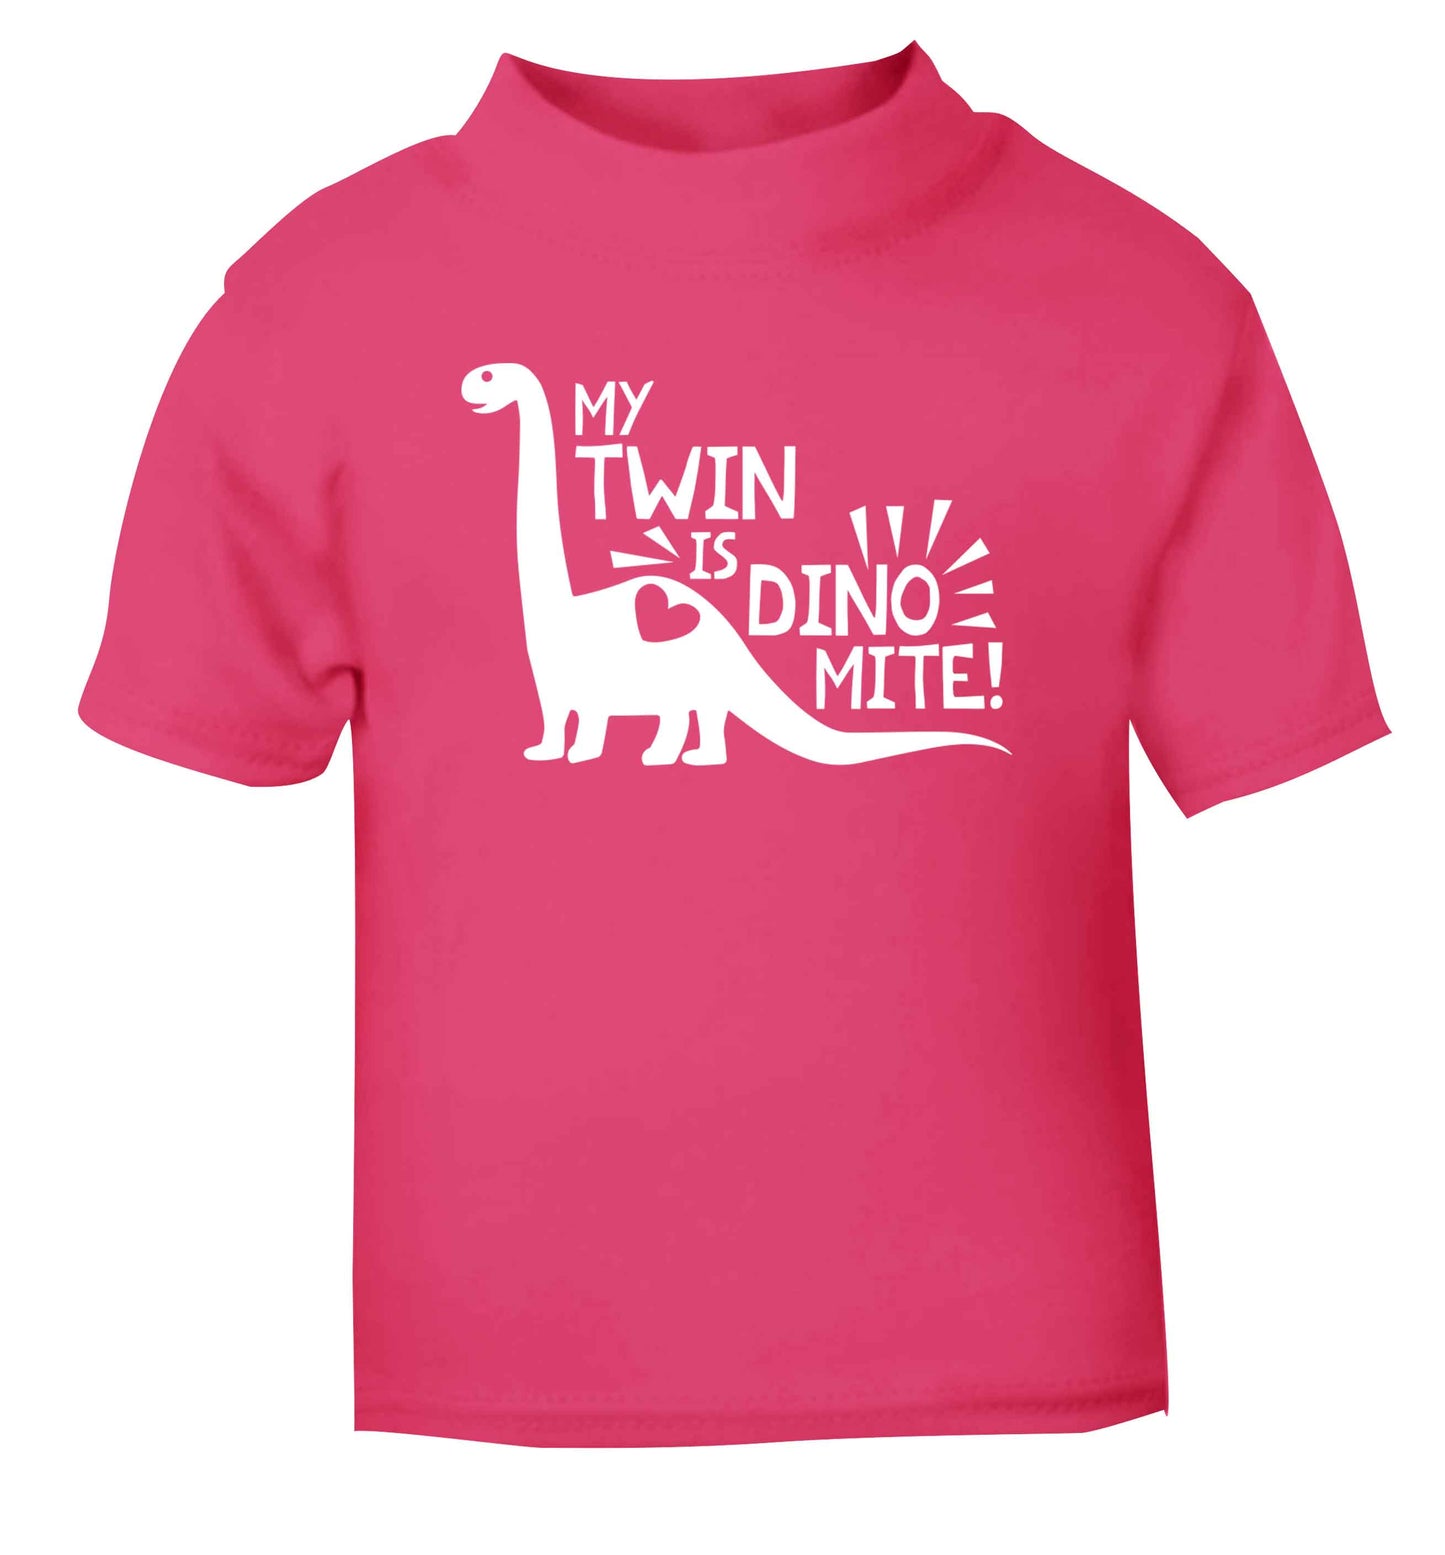 My twin is dinomite! pink Baby Toddler Tshirt 2 Years